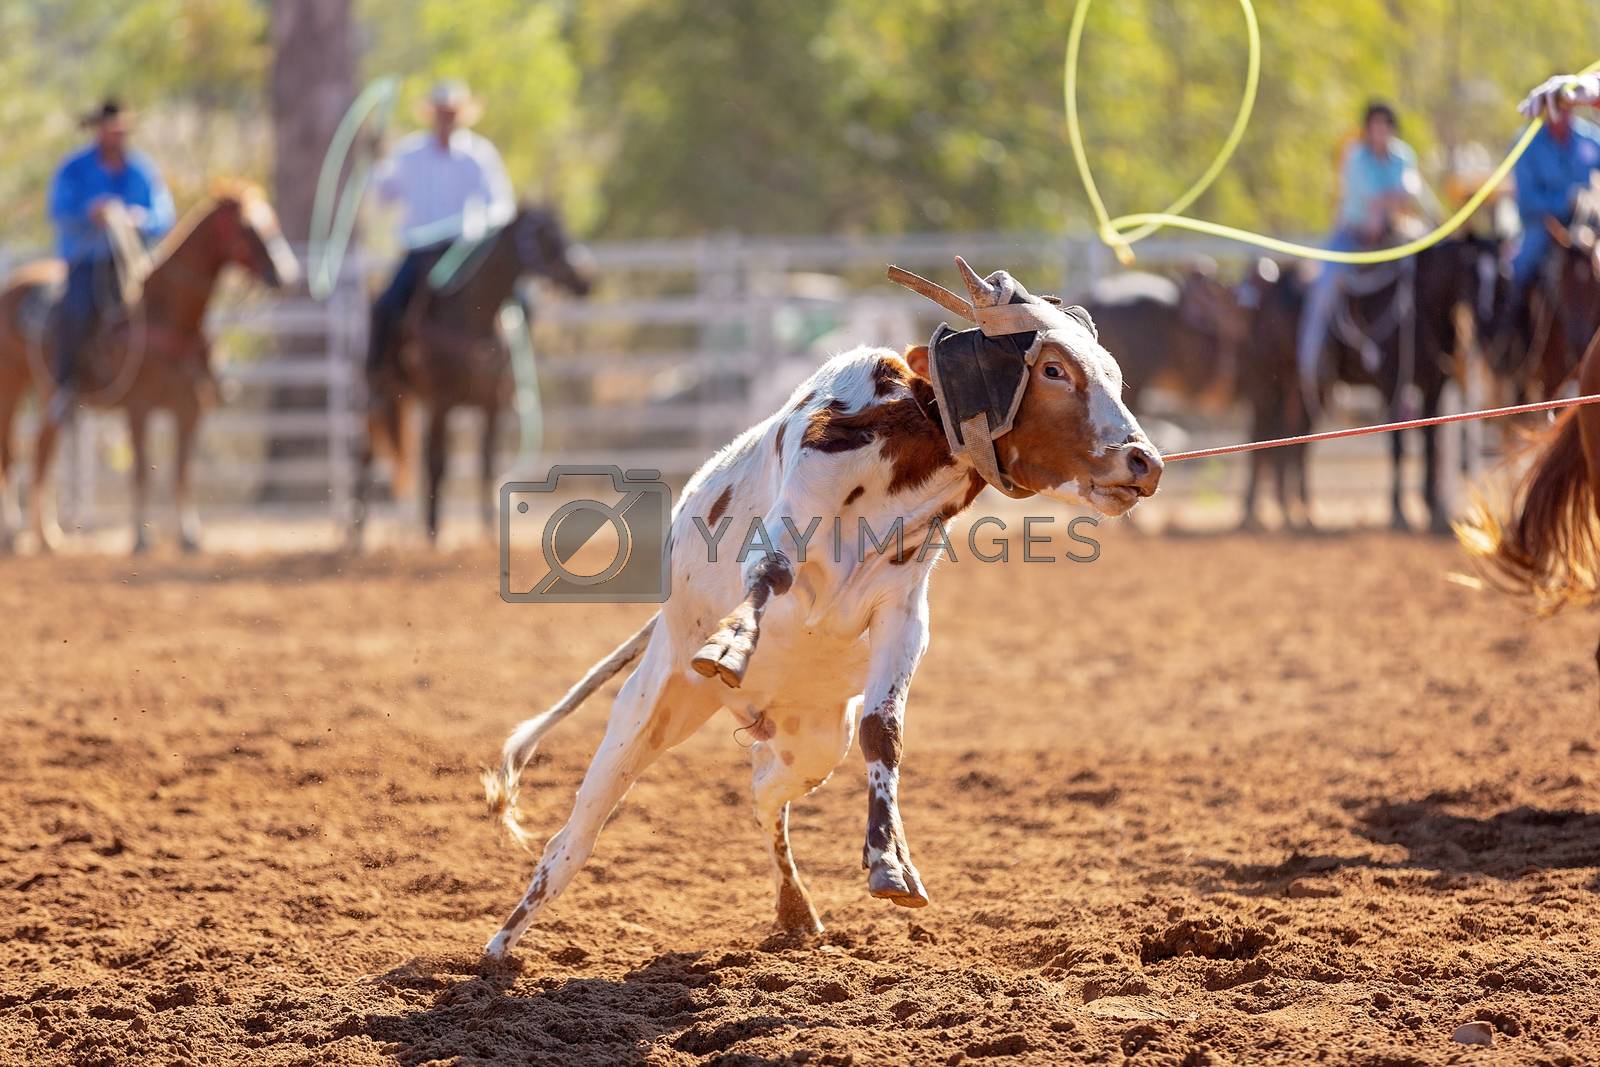 Royalty free image of Australian Team Calf Roping Rodeo Event by 	JacksonStock